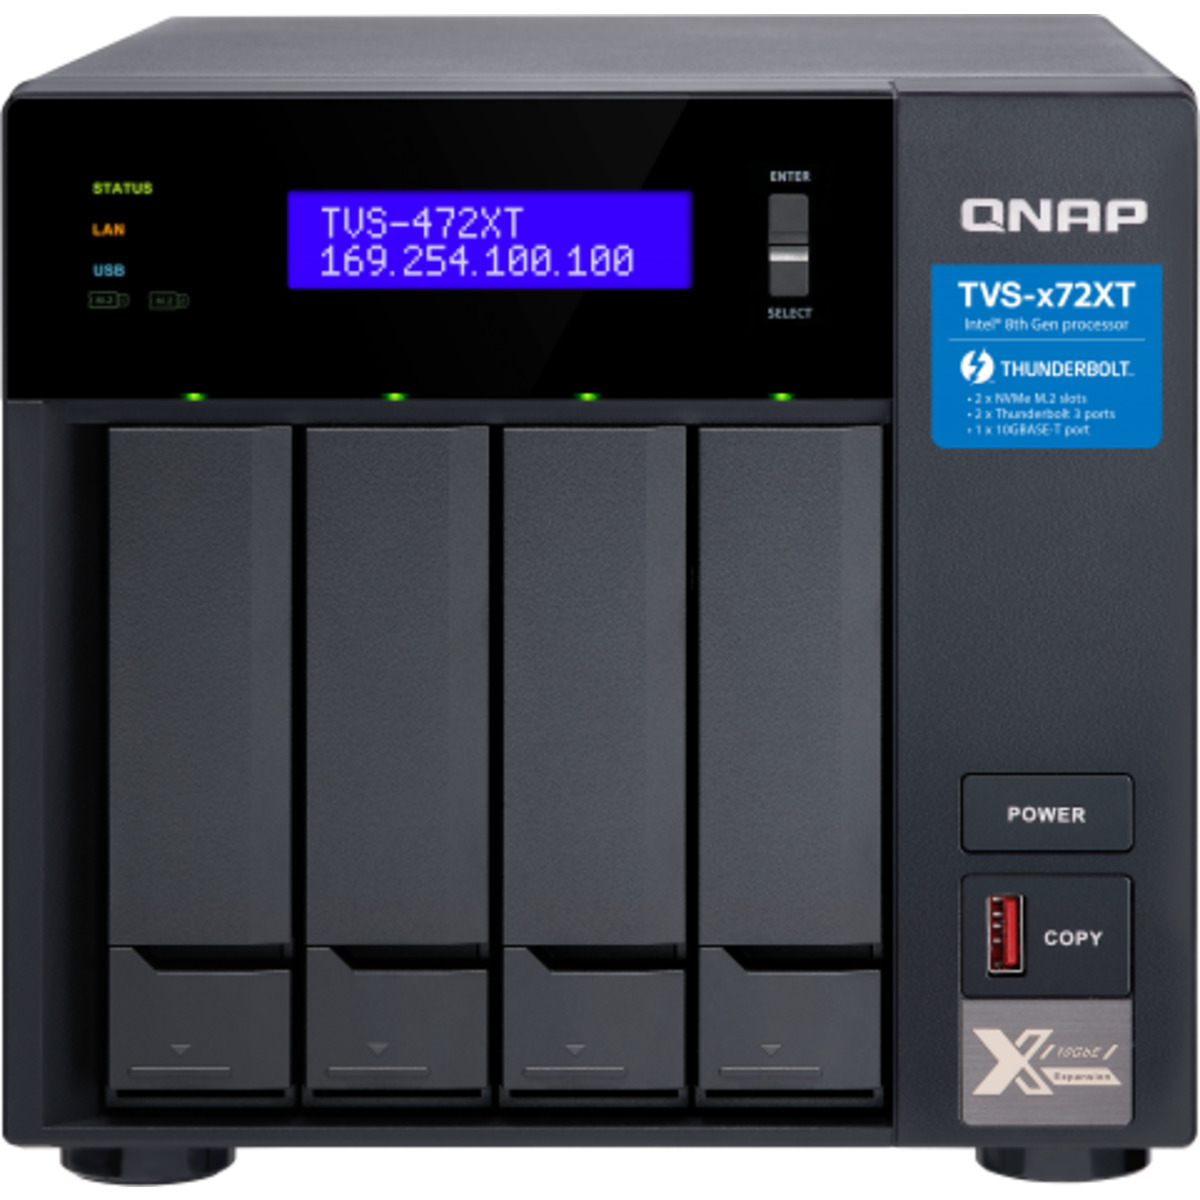 QNAP TVS-472XT Thunderbolt 3 40tb 4-Bay Desktop Multimedia / Power User / Business DAS-NAS - Combo Direct + Network Storage Device 4x10tb Seagate IronWolf ST10000VN000 3.5 7200rpm SATA 6Gb/s HDD NAS Class Drives Installed - Burn-In Tested - FREE RAM UPGRADE TVS-472XT Thunderbolt 3